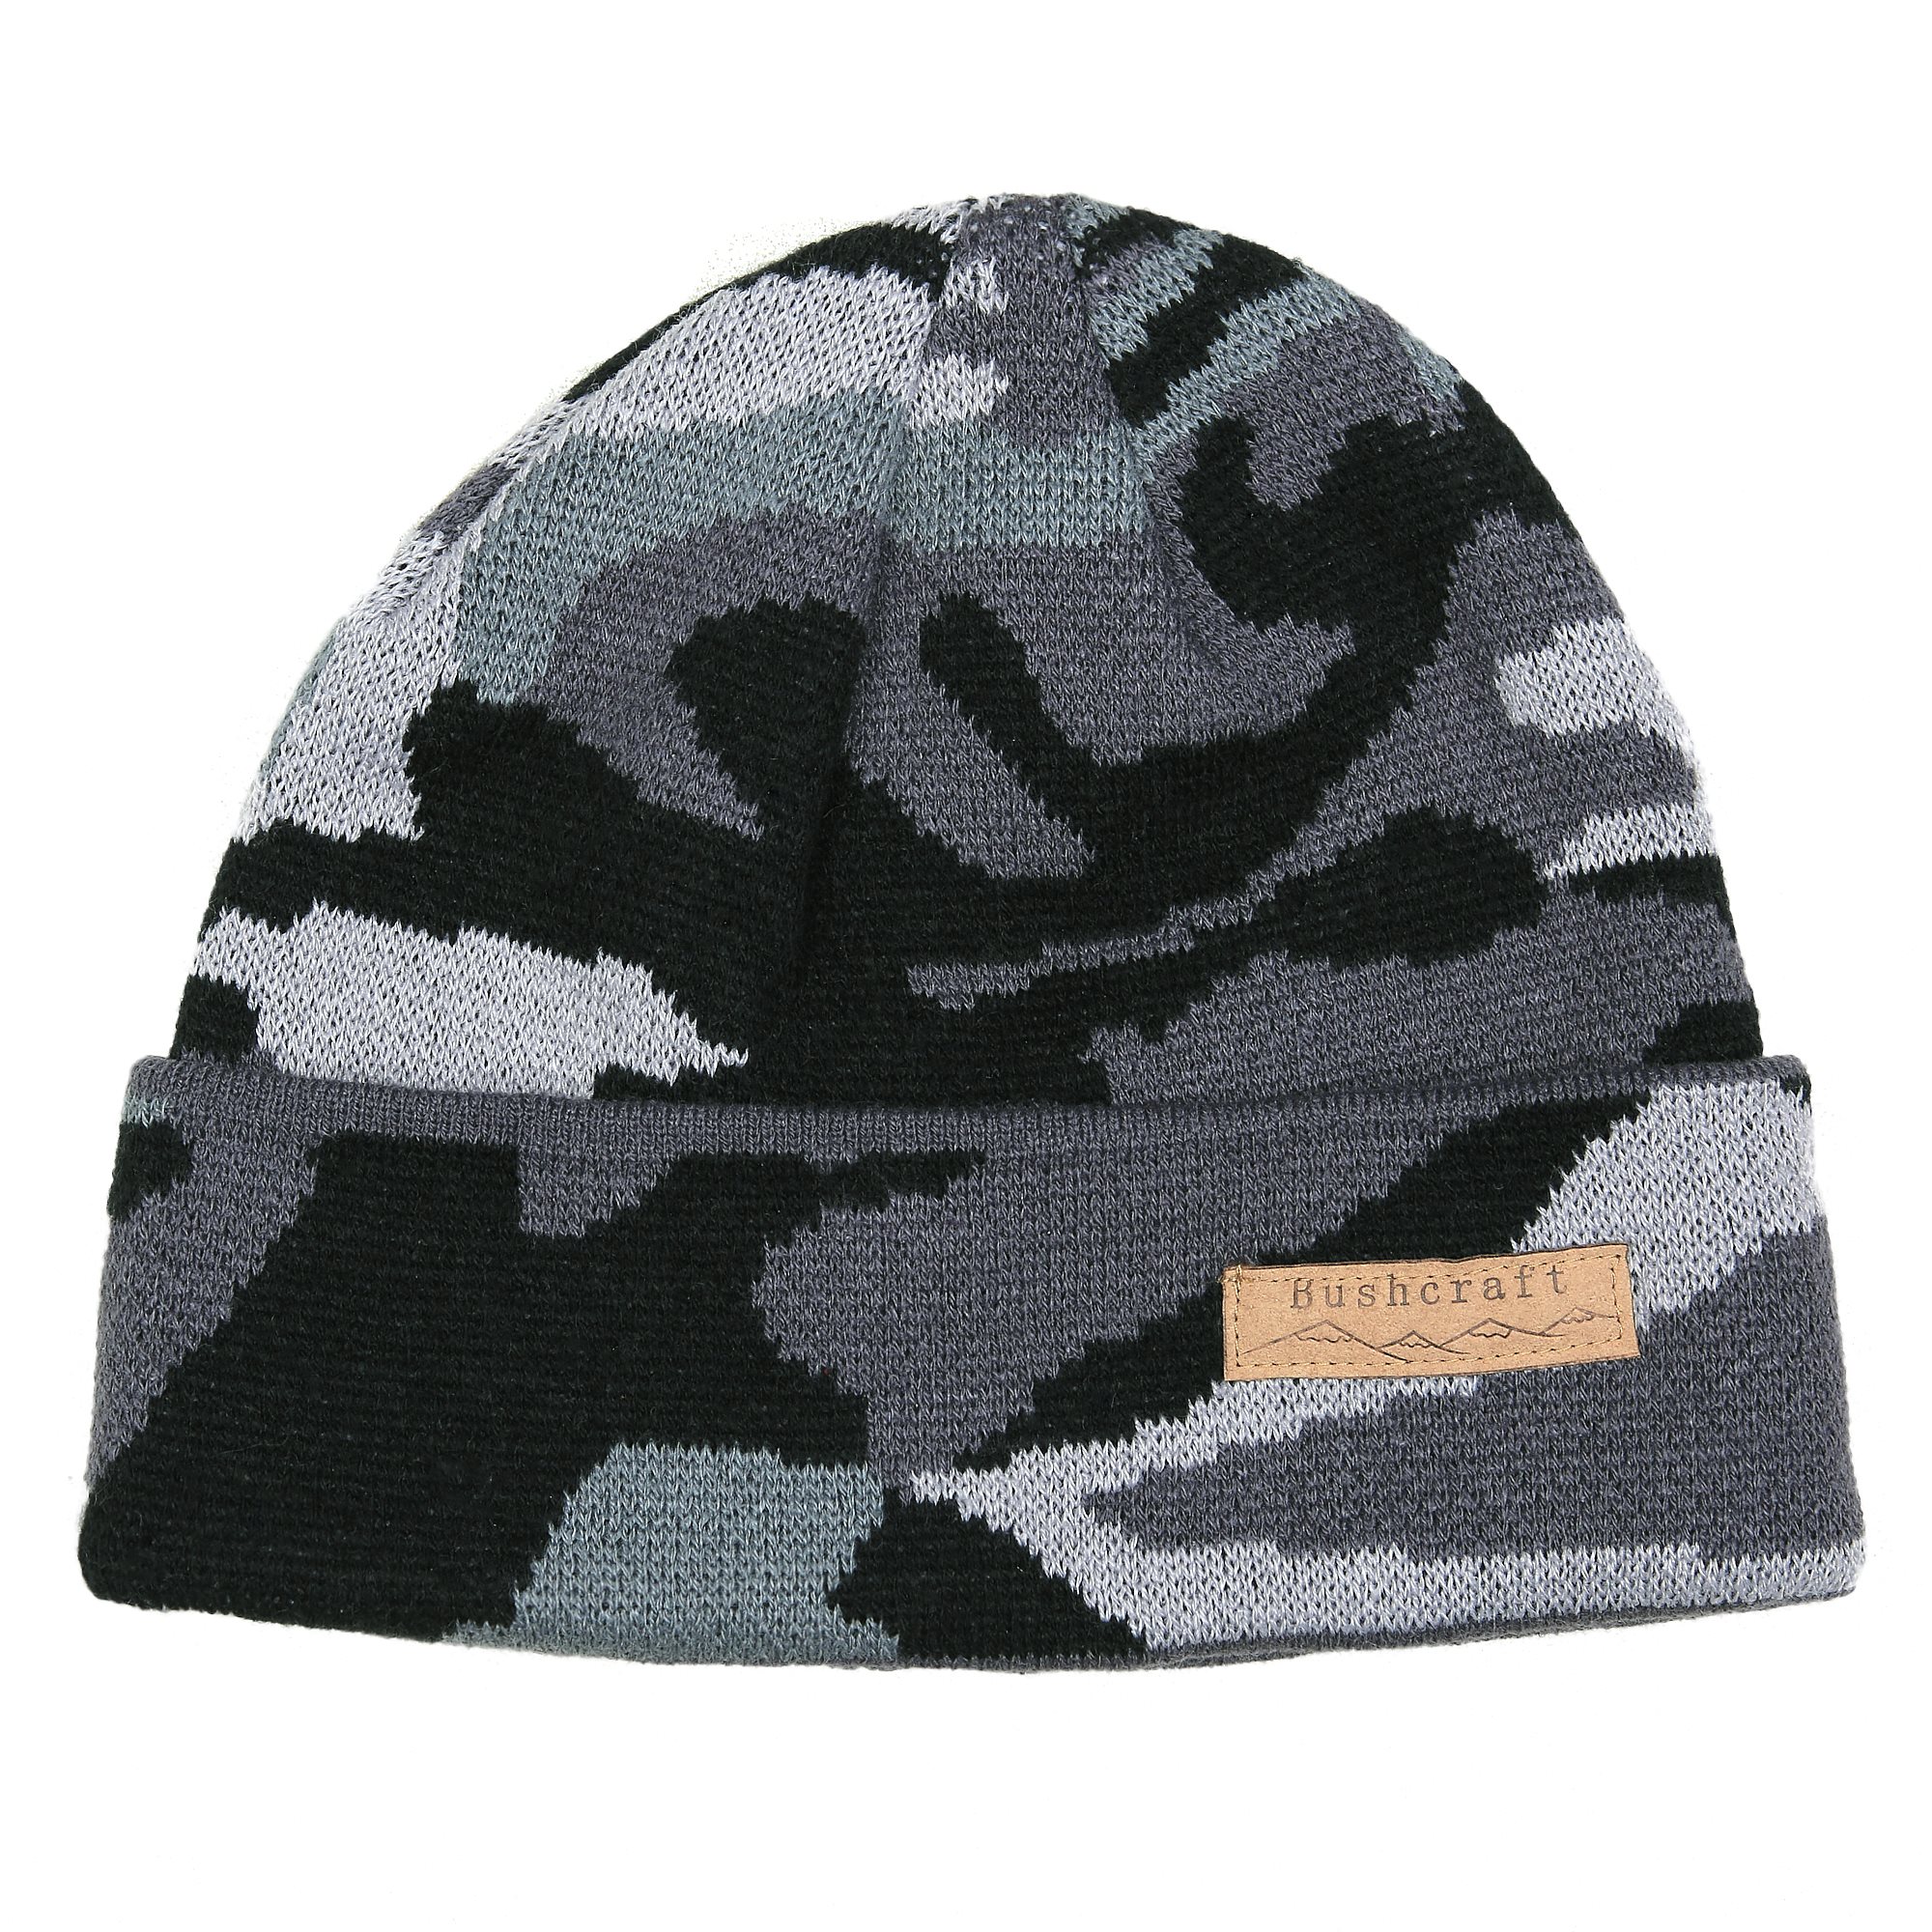 URBAN CAMO BEANIE HAT KNITTED COLD WINTER ARMY MILITARY CAMOUFLAGE 